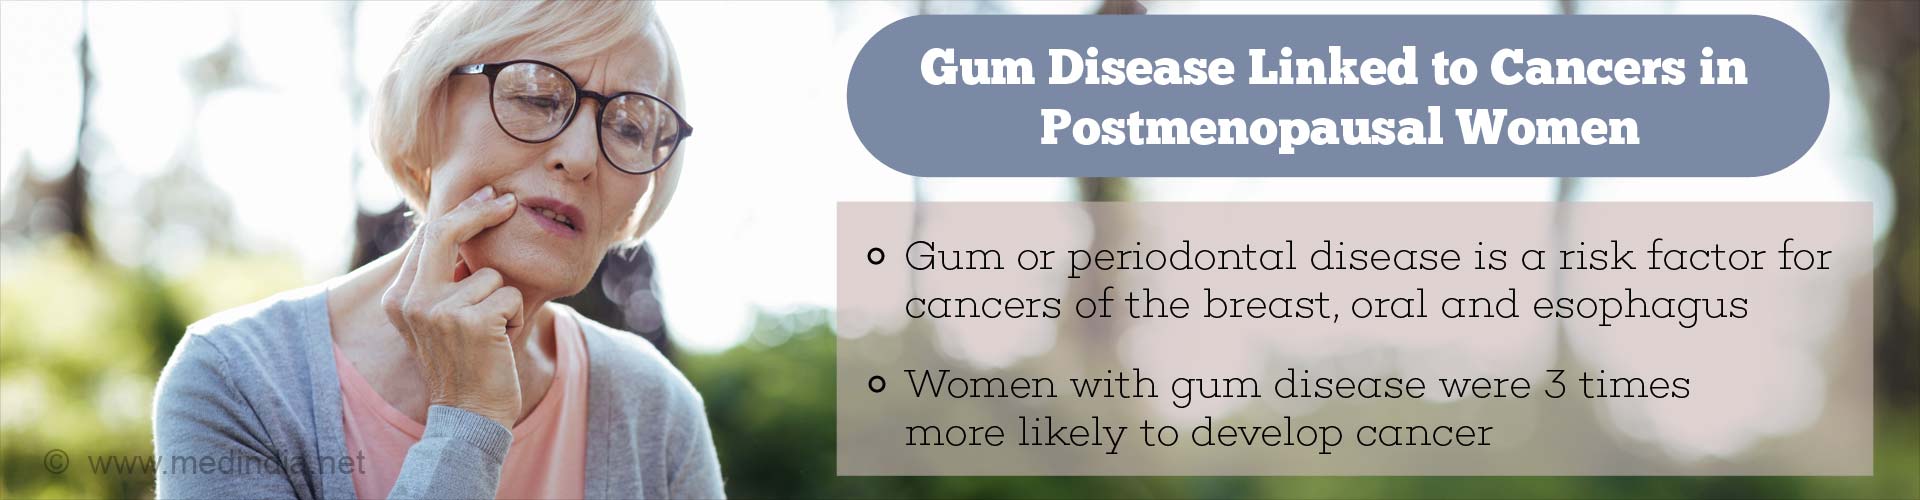 Gum disease linked to cancers in postmenopausal women
- Gum or peridontal disease is a risk factor for cancers of breast, oral and esophagus
- Women with gum disease were 3 times more likely to develop cancer